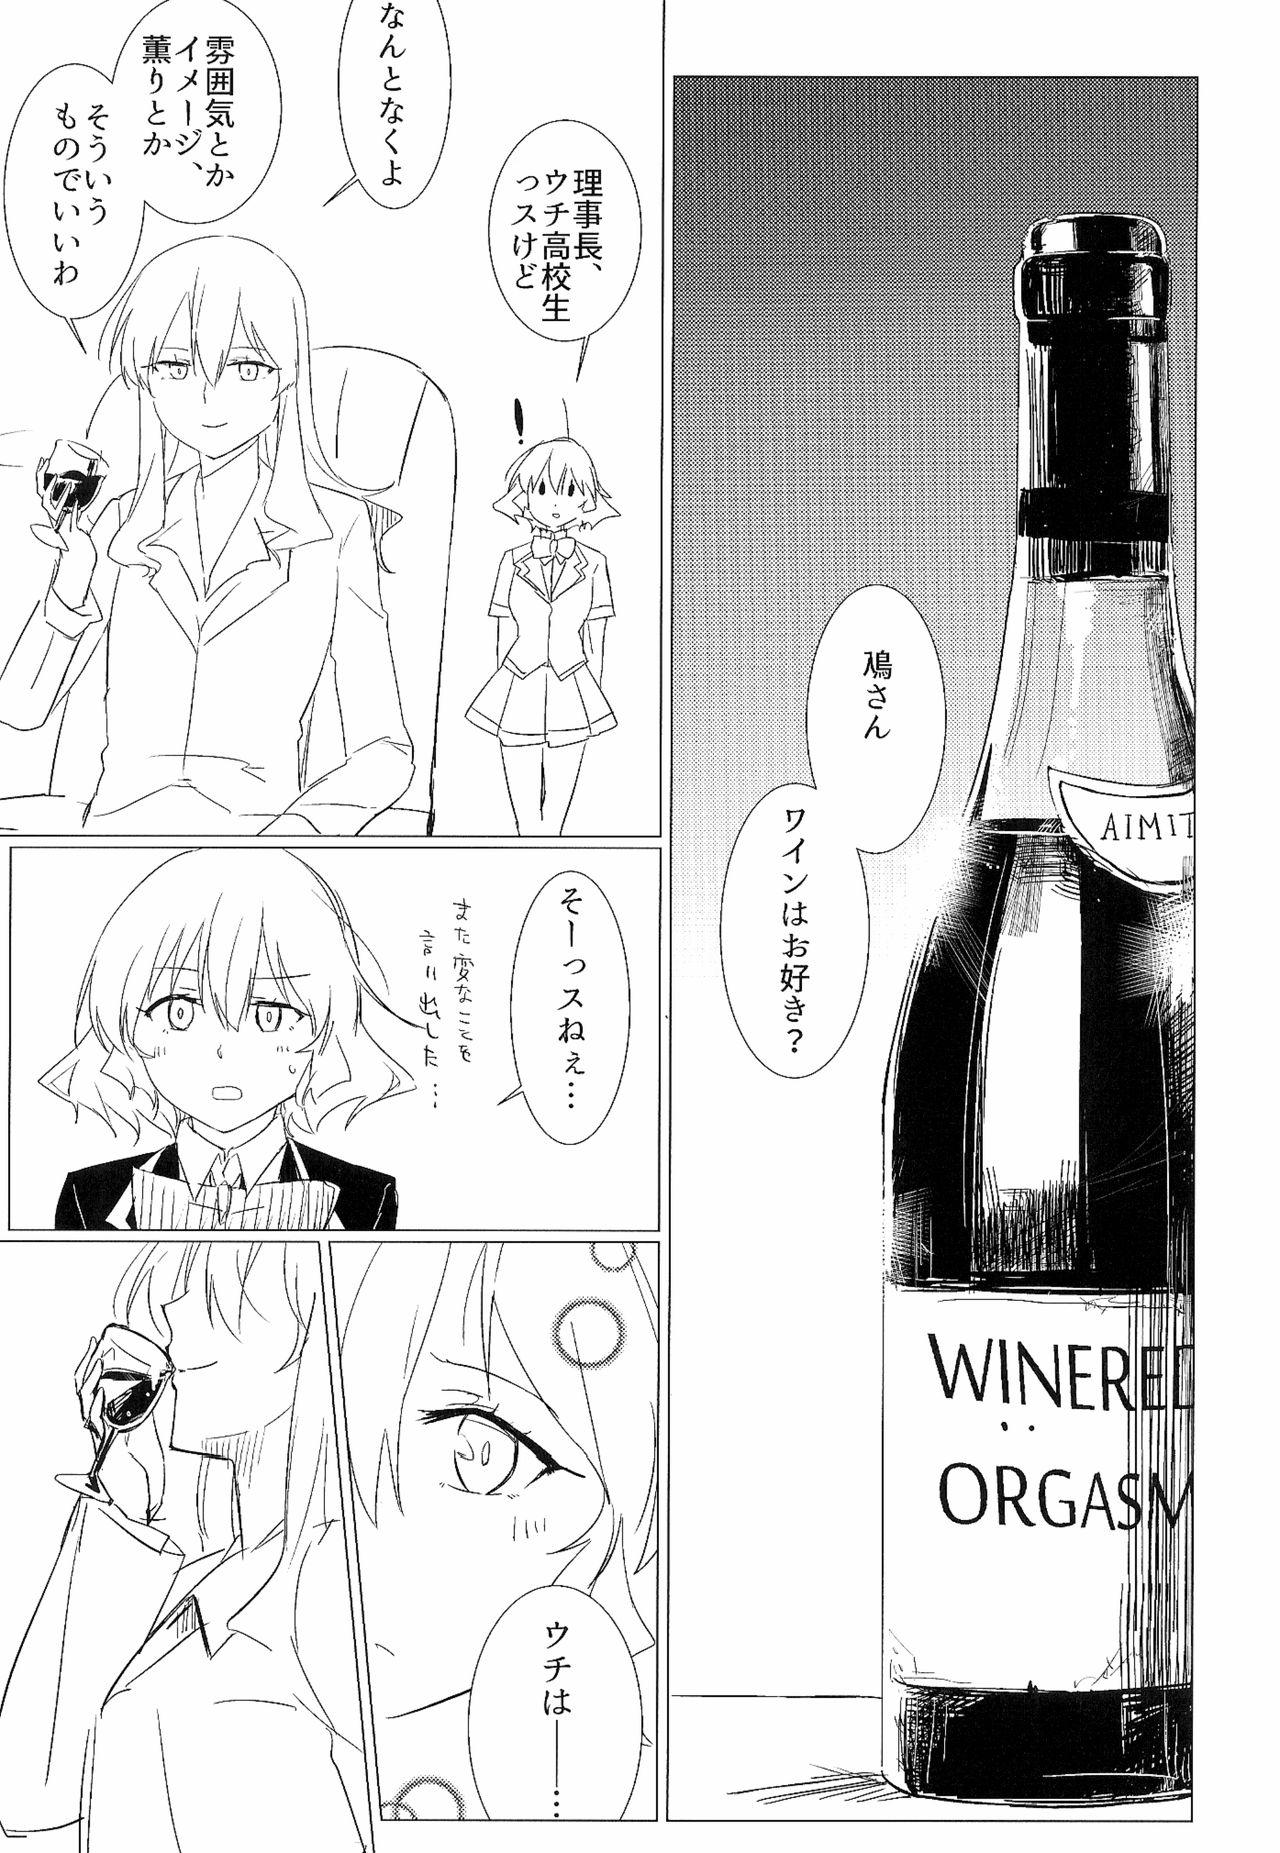 Hot Wife Wine-Red Orgasm - Akuma no riddle Pussylicking - Page 3